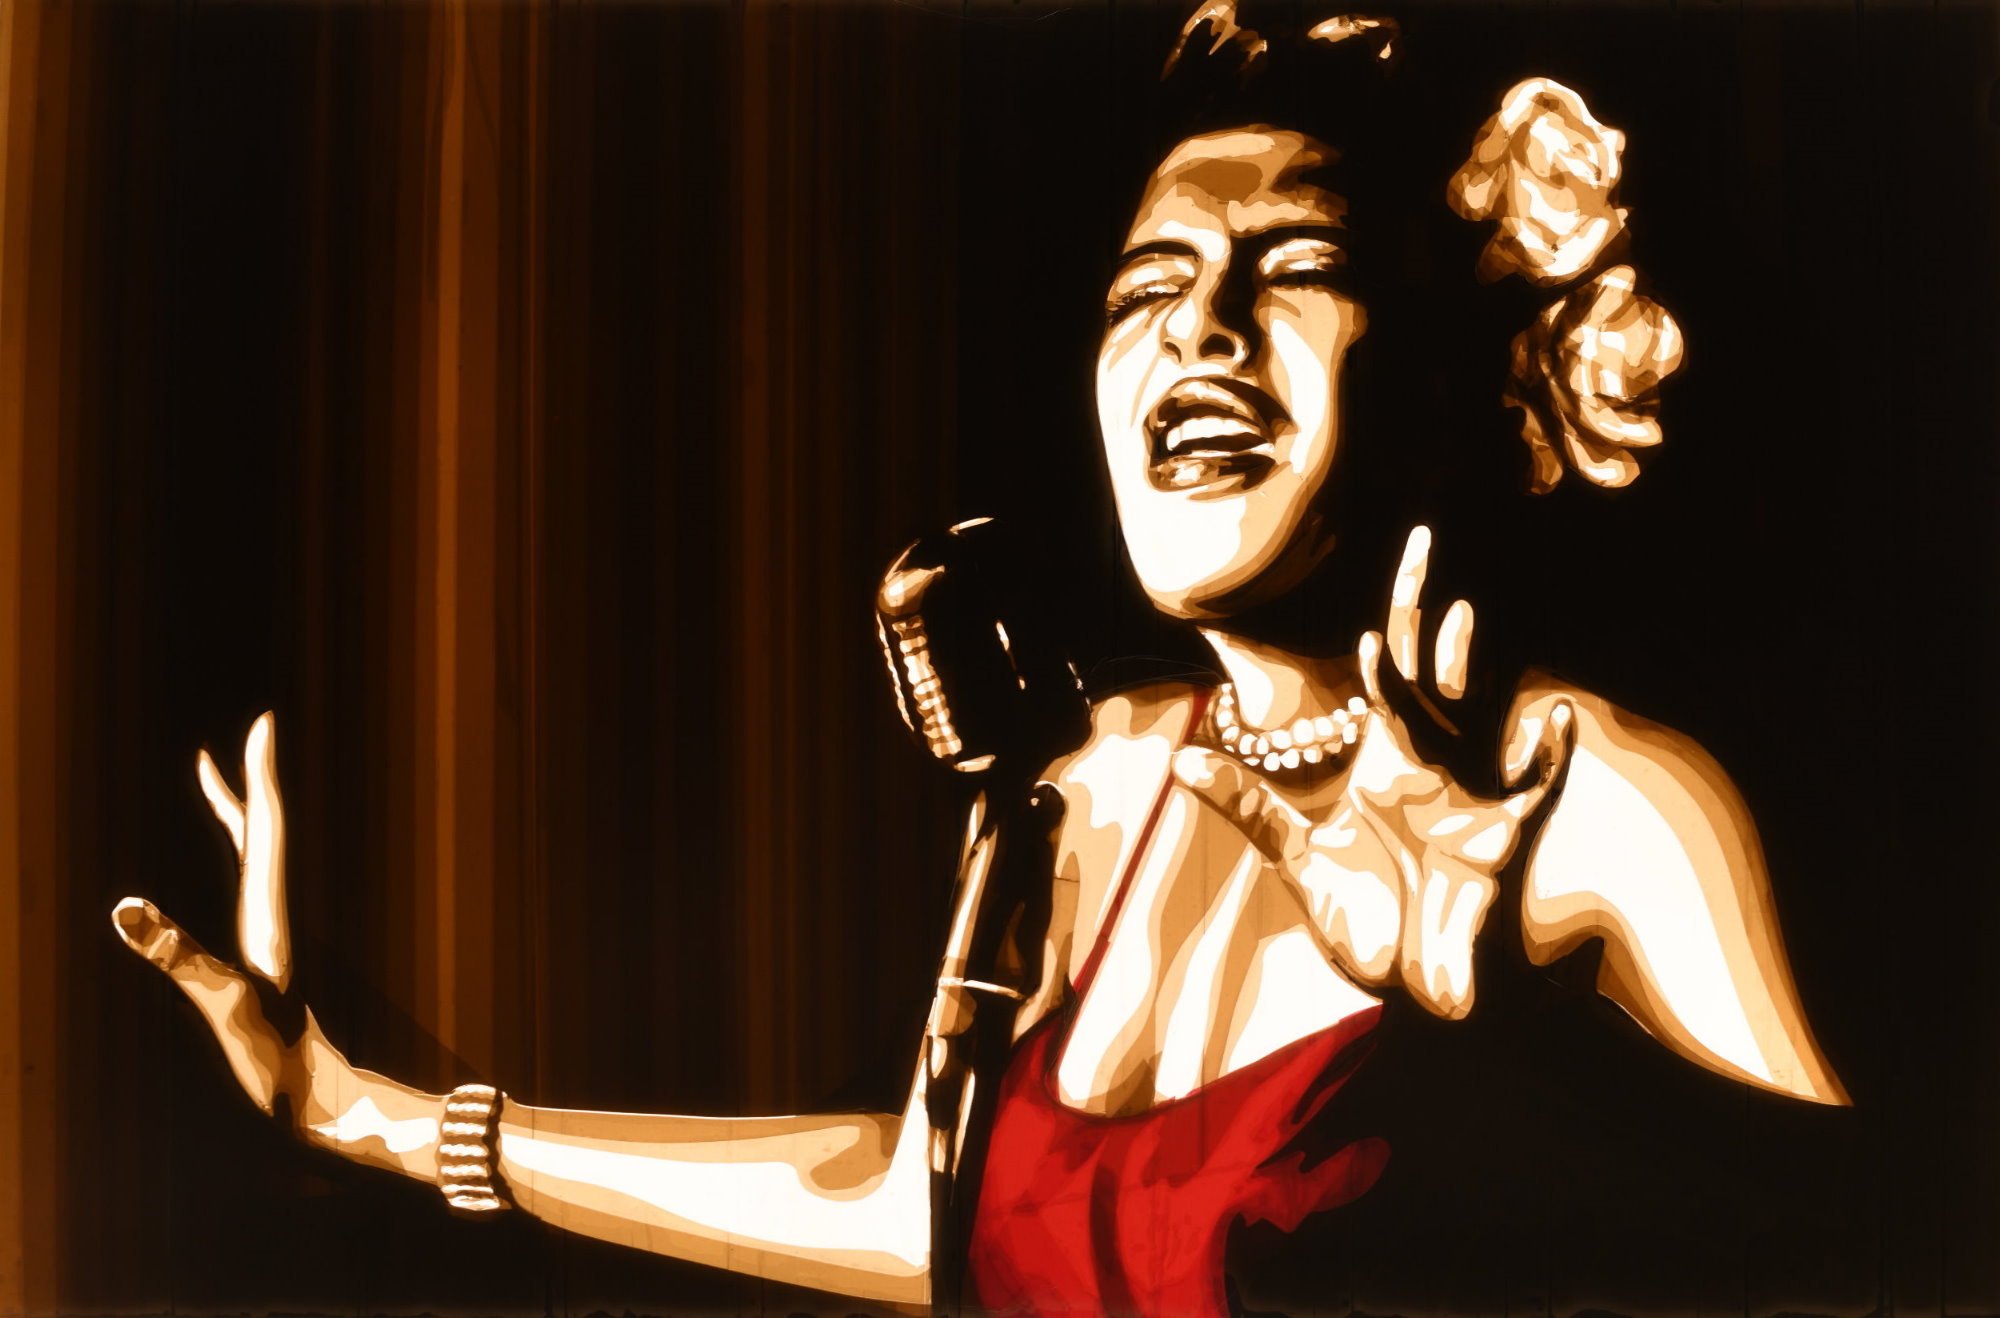 This artwork made of brown packing tape depicts Billie Holiday, the famous jazz and blues singer